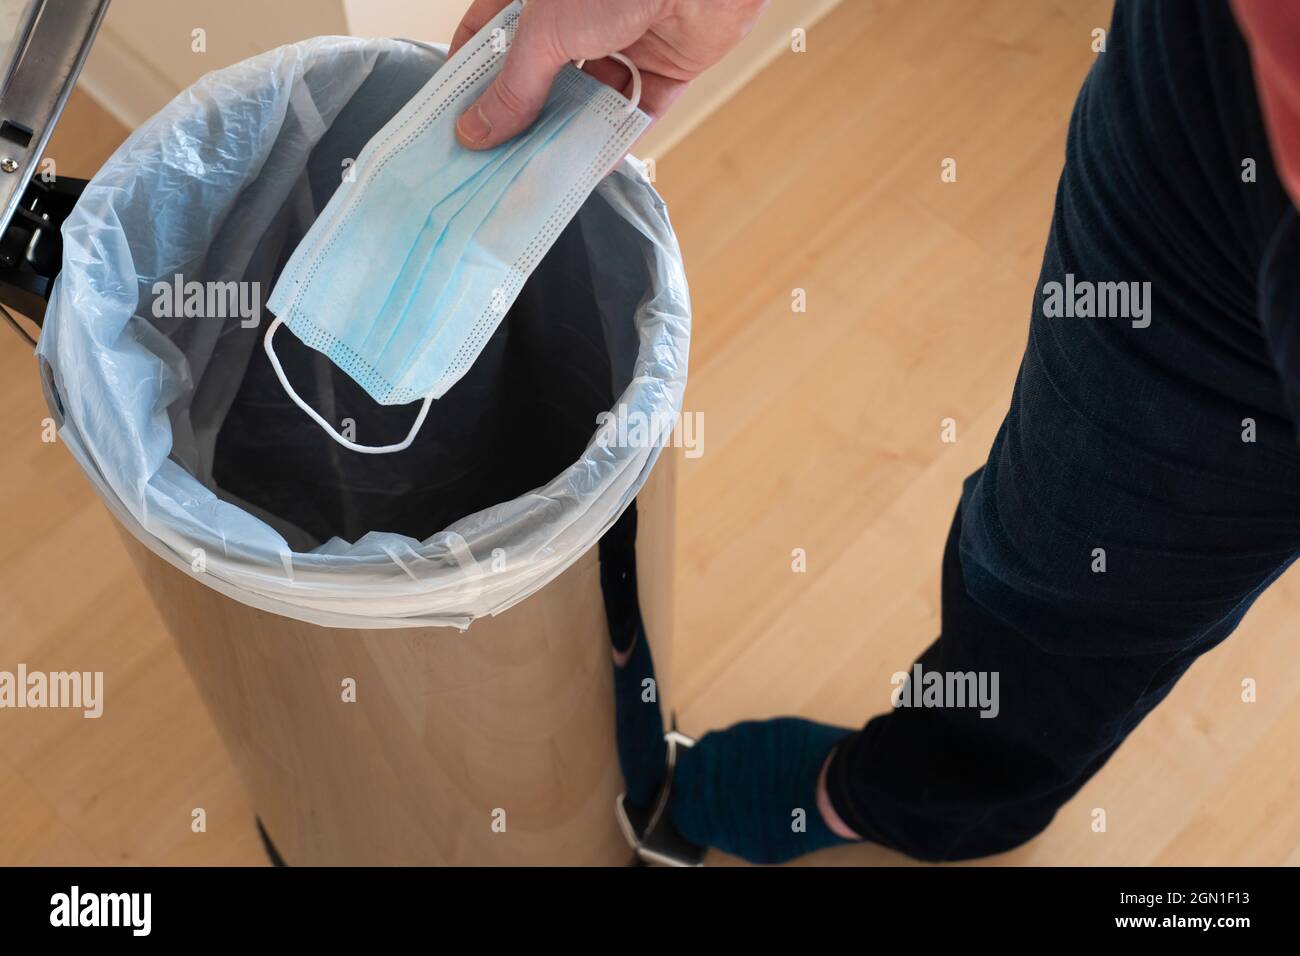 A man throwing a blue disposable surgical mask away into a pedal bin. Concept: anti masker, no face mask, binning face mask, mask debate Stock Photo